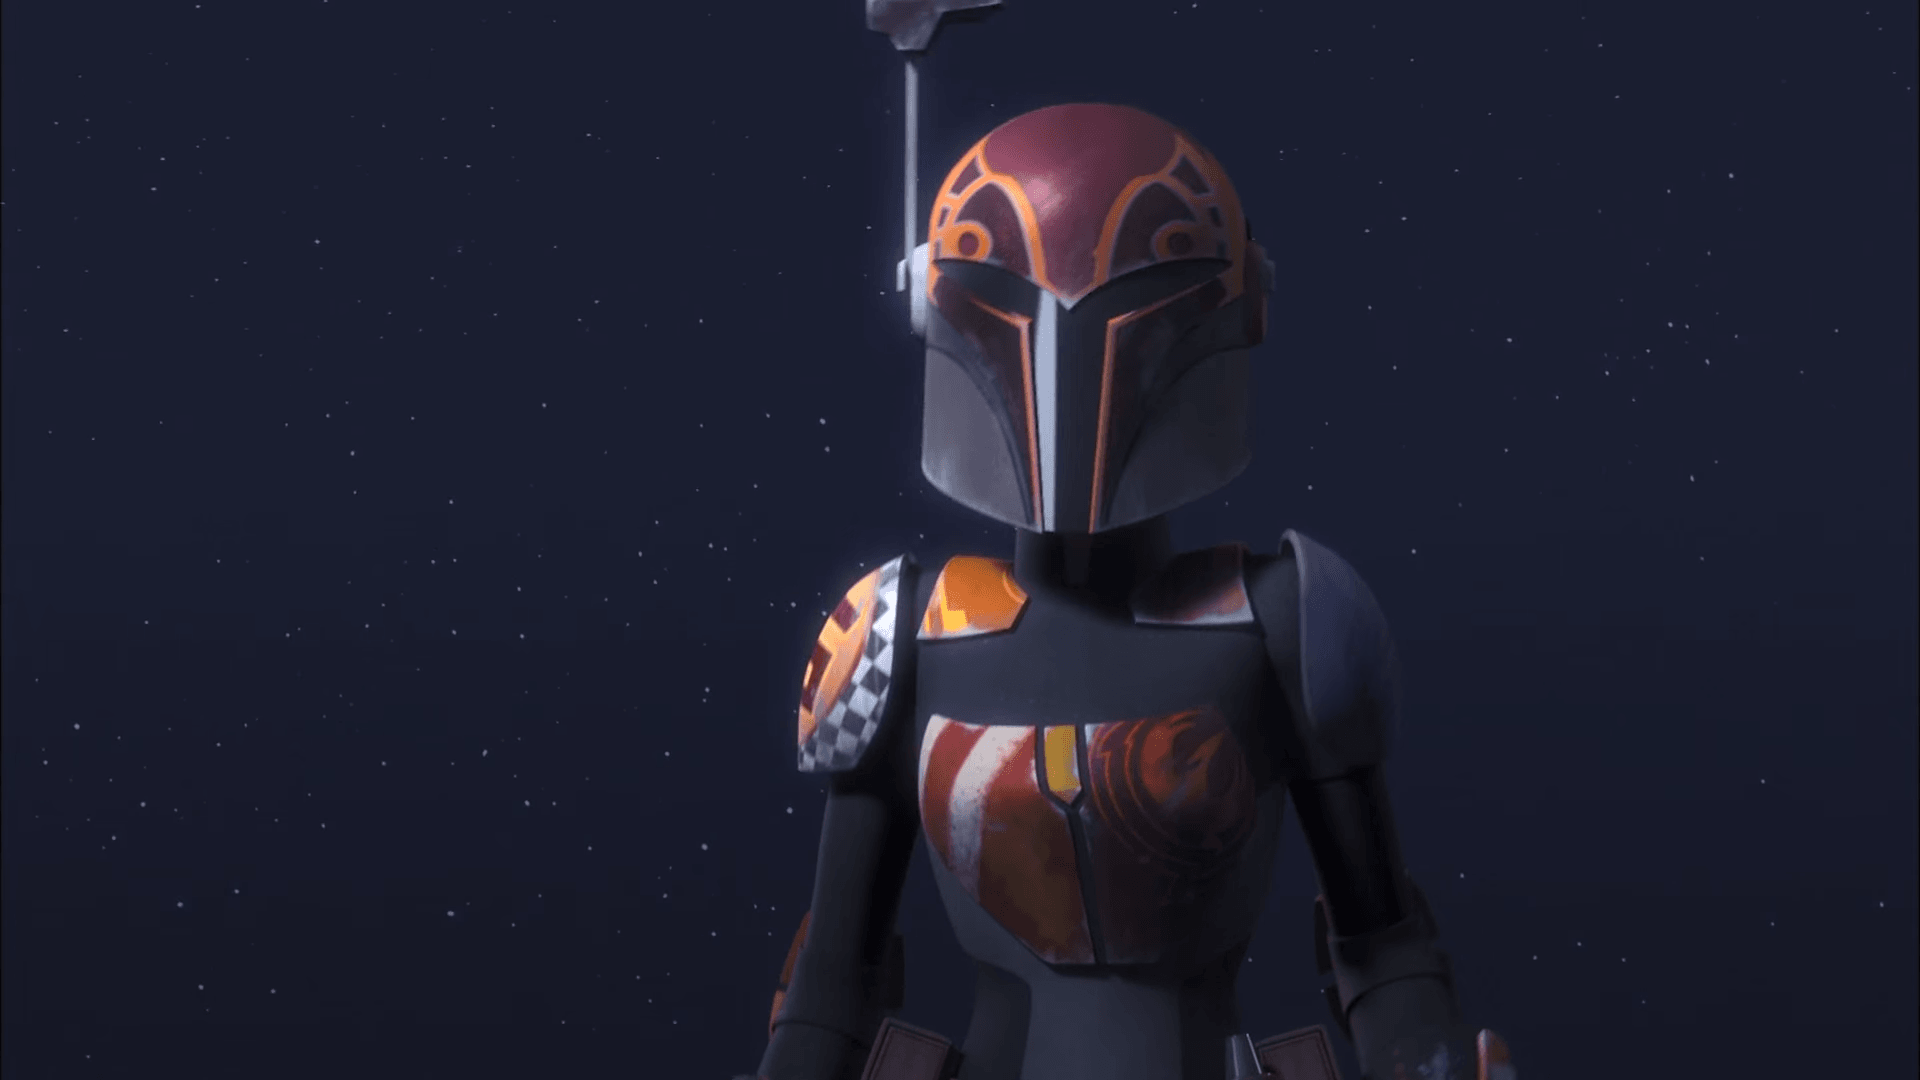 Small Chance In Helmet: Could Sabine Wren Appear in 'The Mandalorian? 